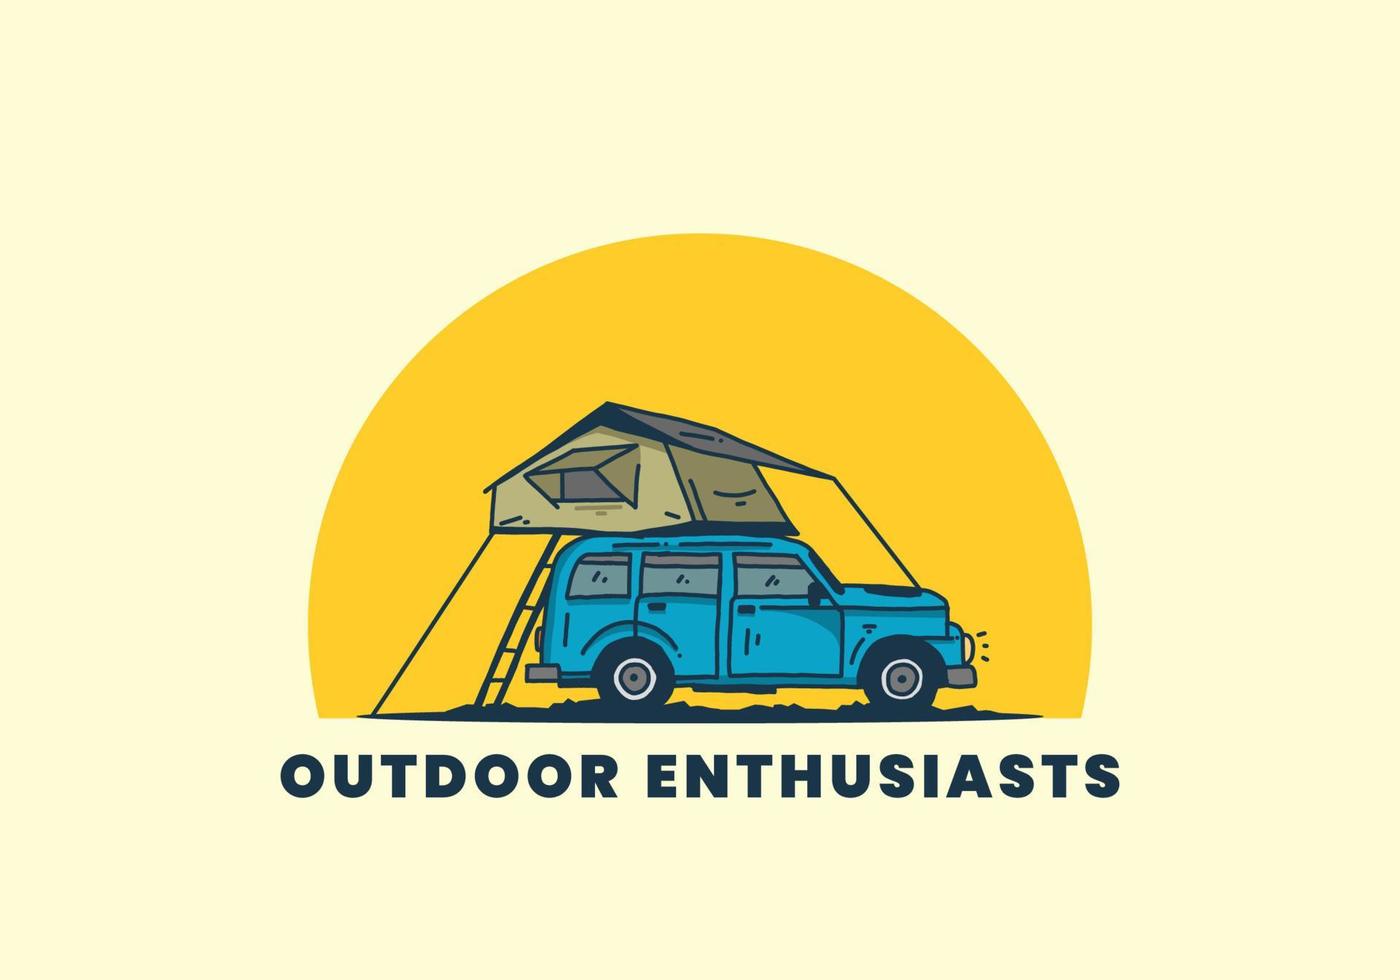 Camping on the roof of the car illustration vector